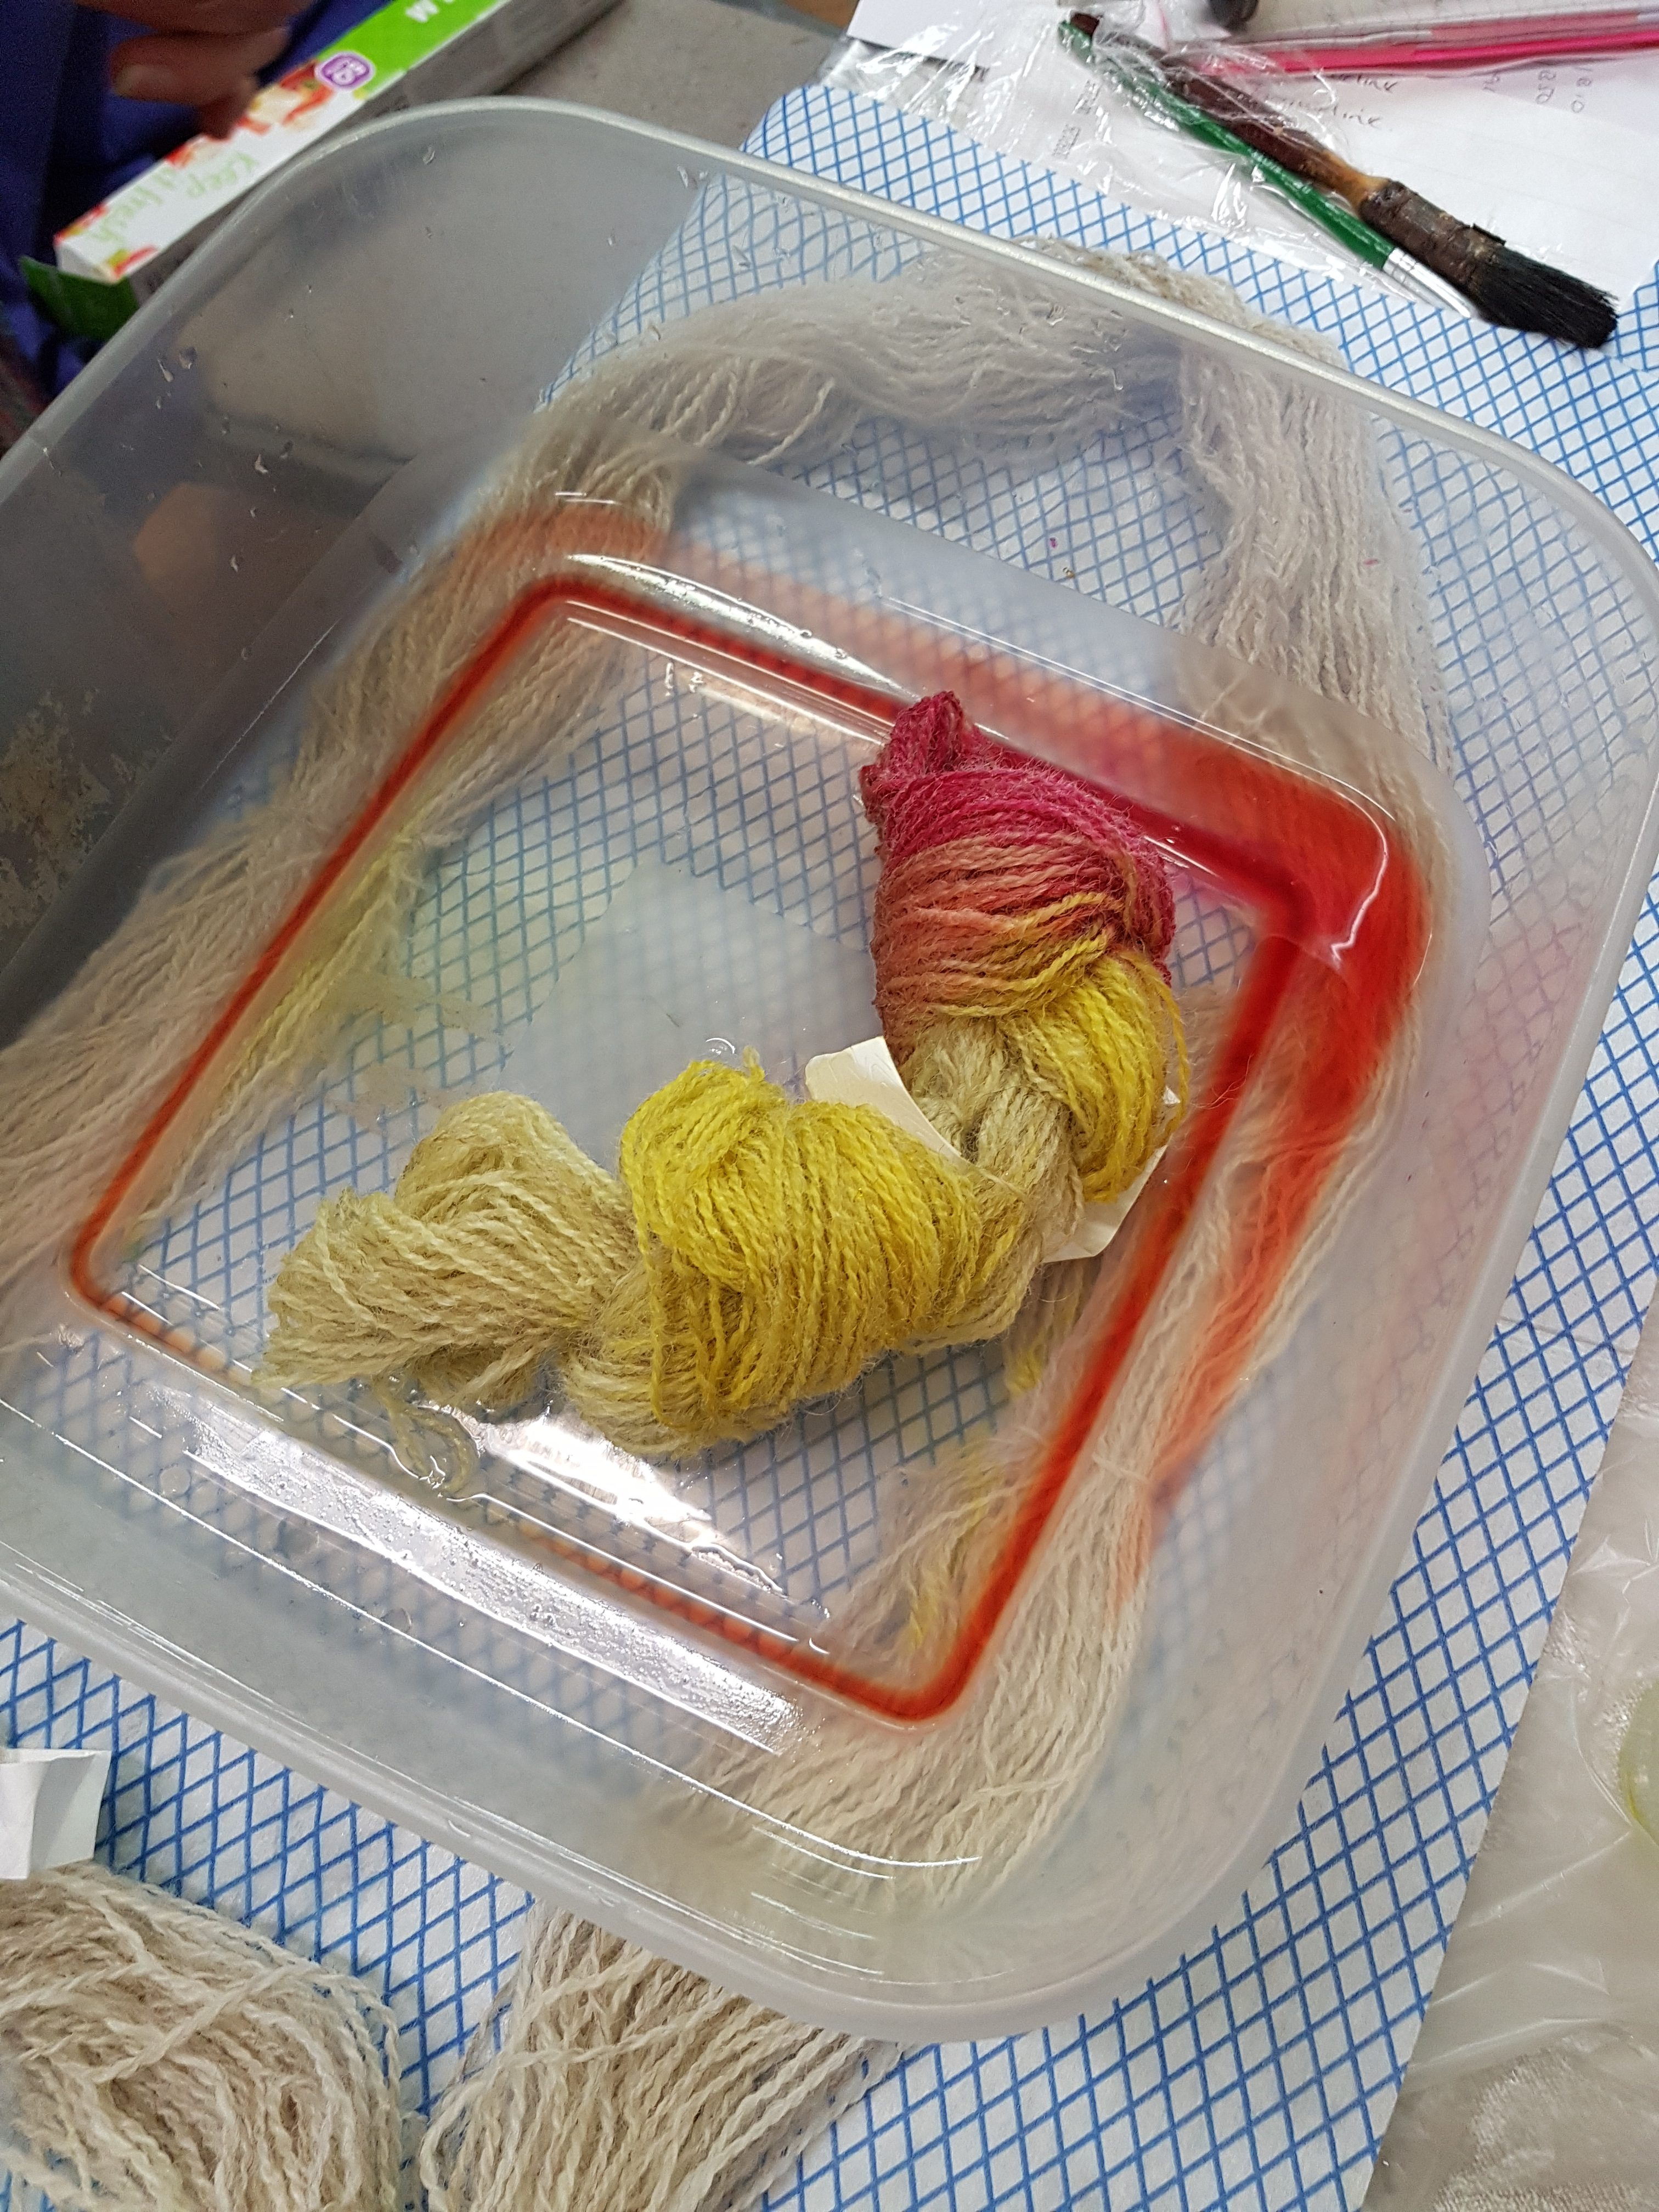 Oxford Guild of Weavers, Spinners and Dyers - Introduction to acid dyeing and Dyes Past and Present talk